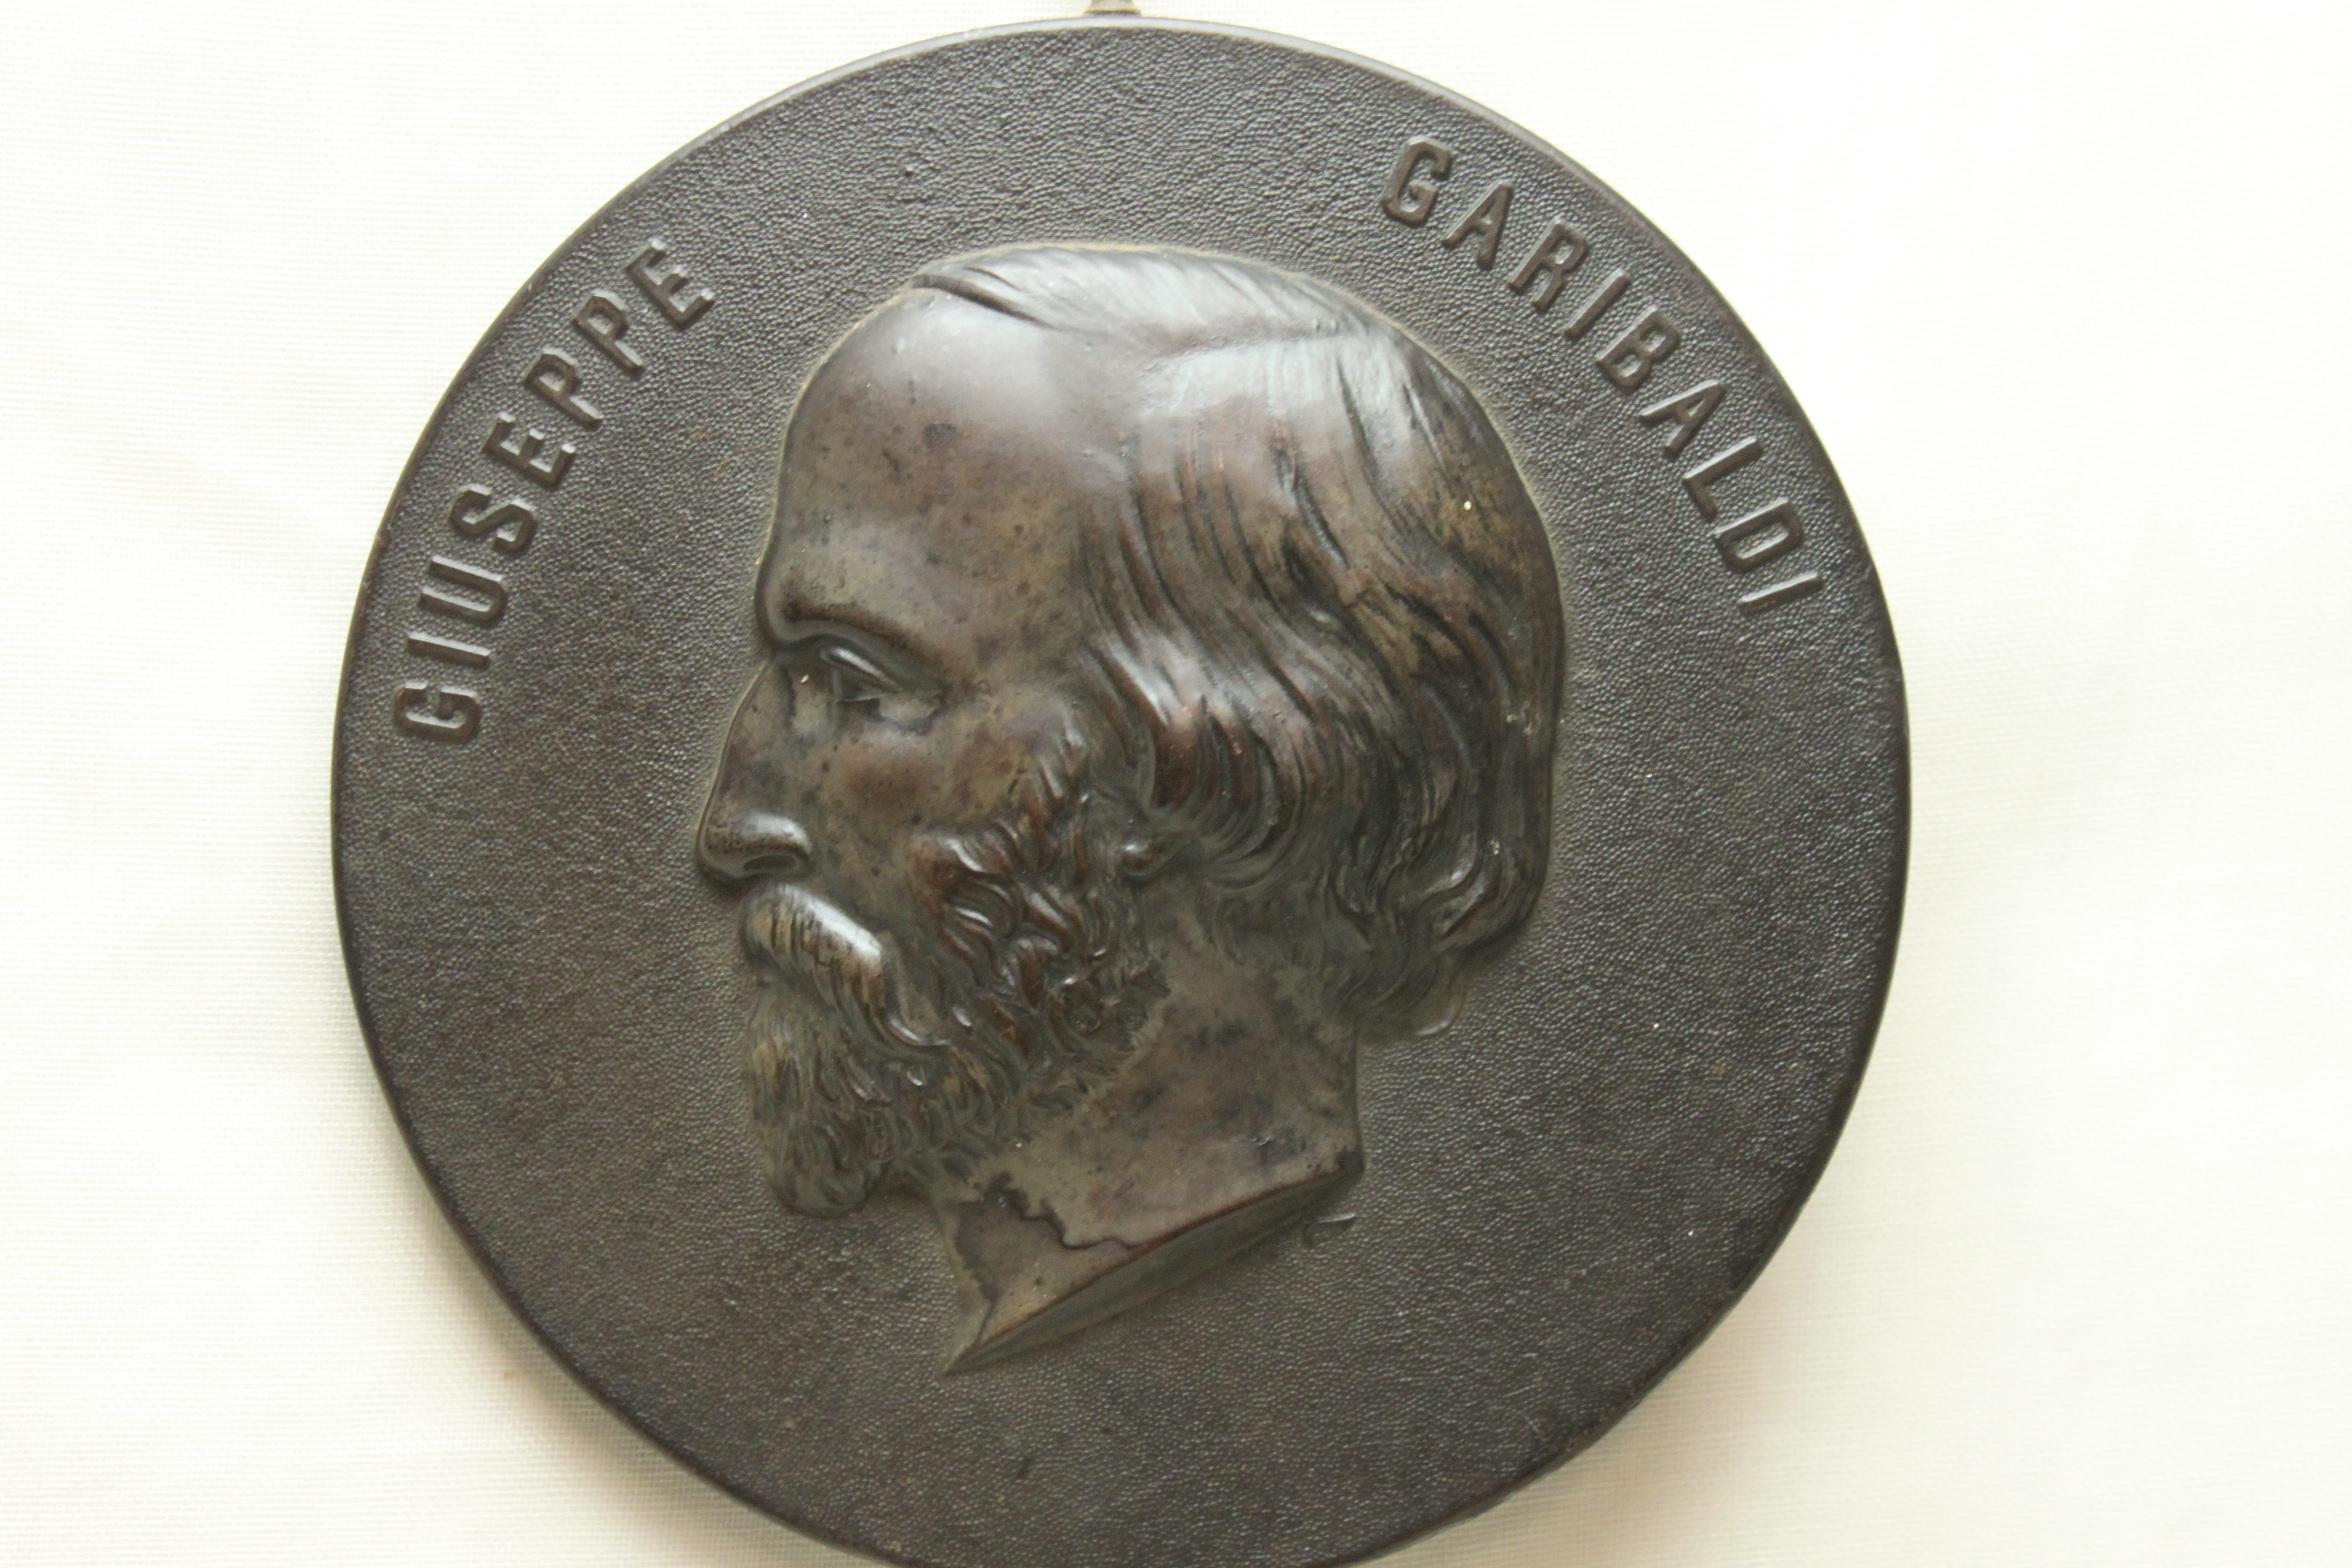 This Bois durci plaque depicts Giuseppe Garibaldi (1807-82), who is well known as a general, a revolutionary and one of the founders of modern Italy. It is from a series of ornamental plaques depicting well known figures from royalty, politics and